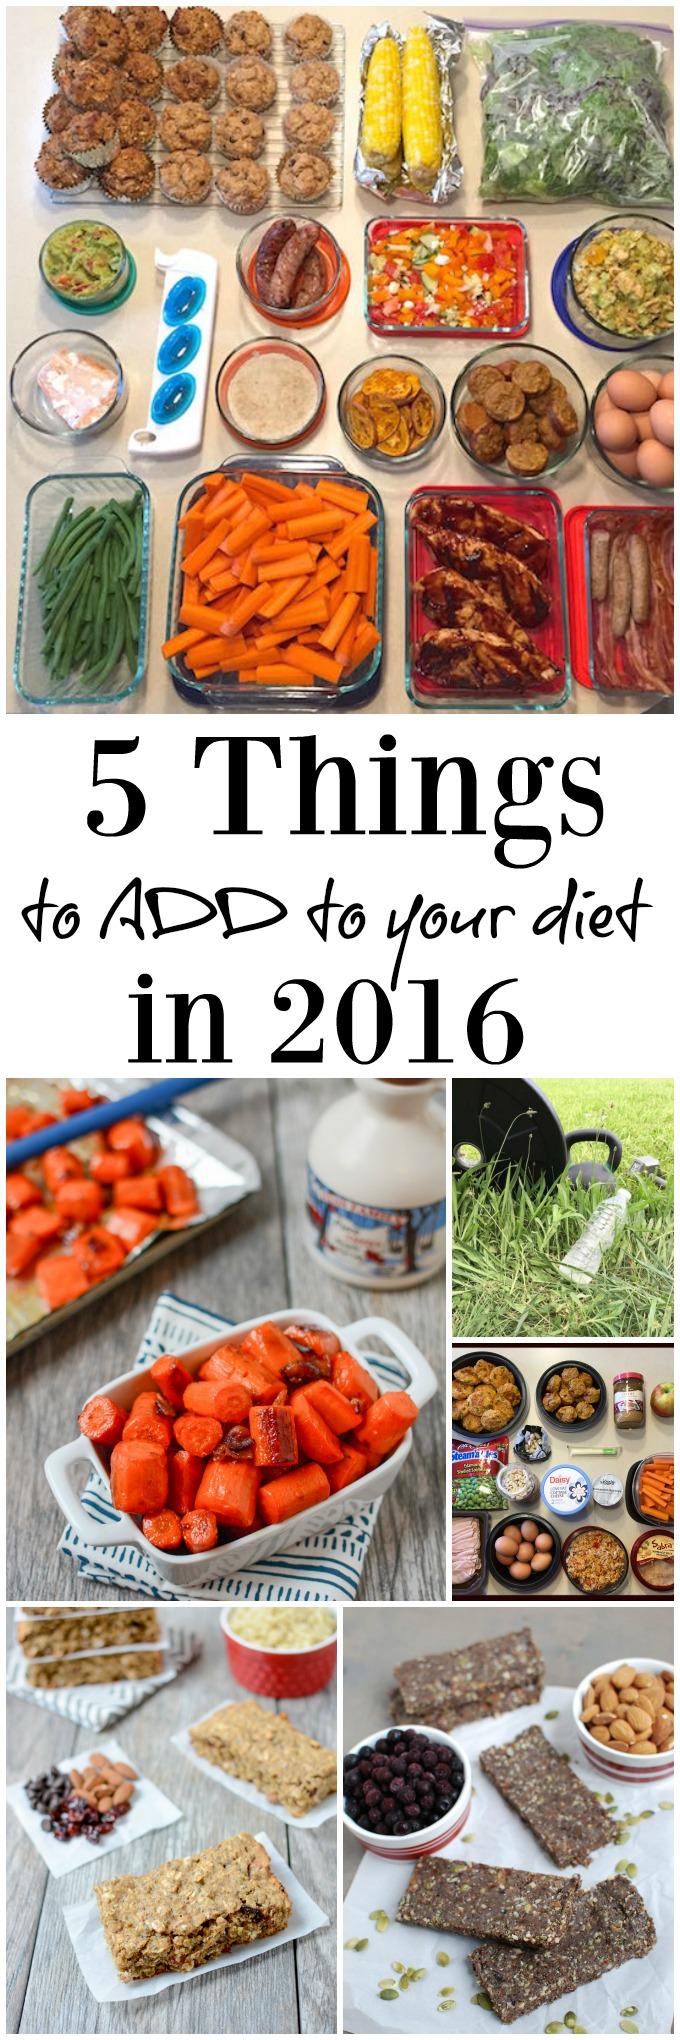 5 Things To Add To Your Diet in 2016